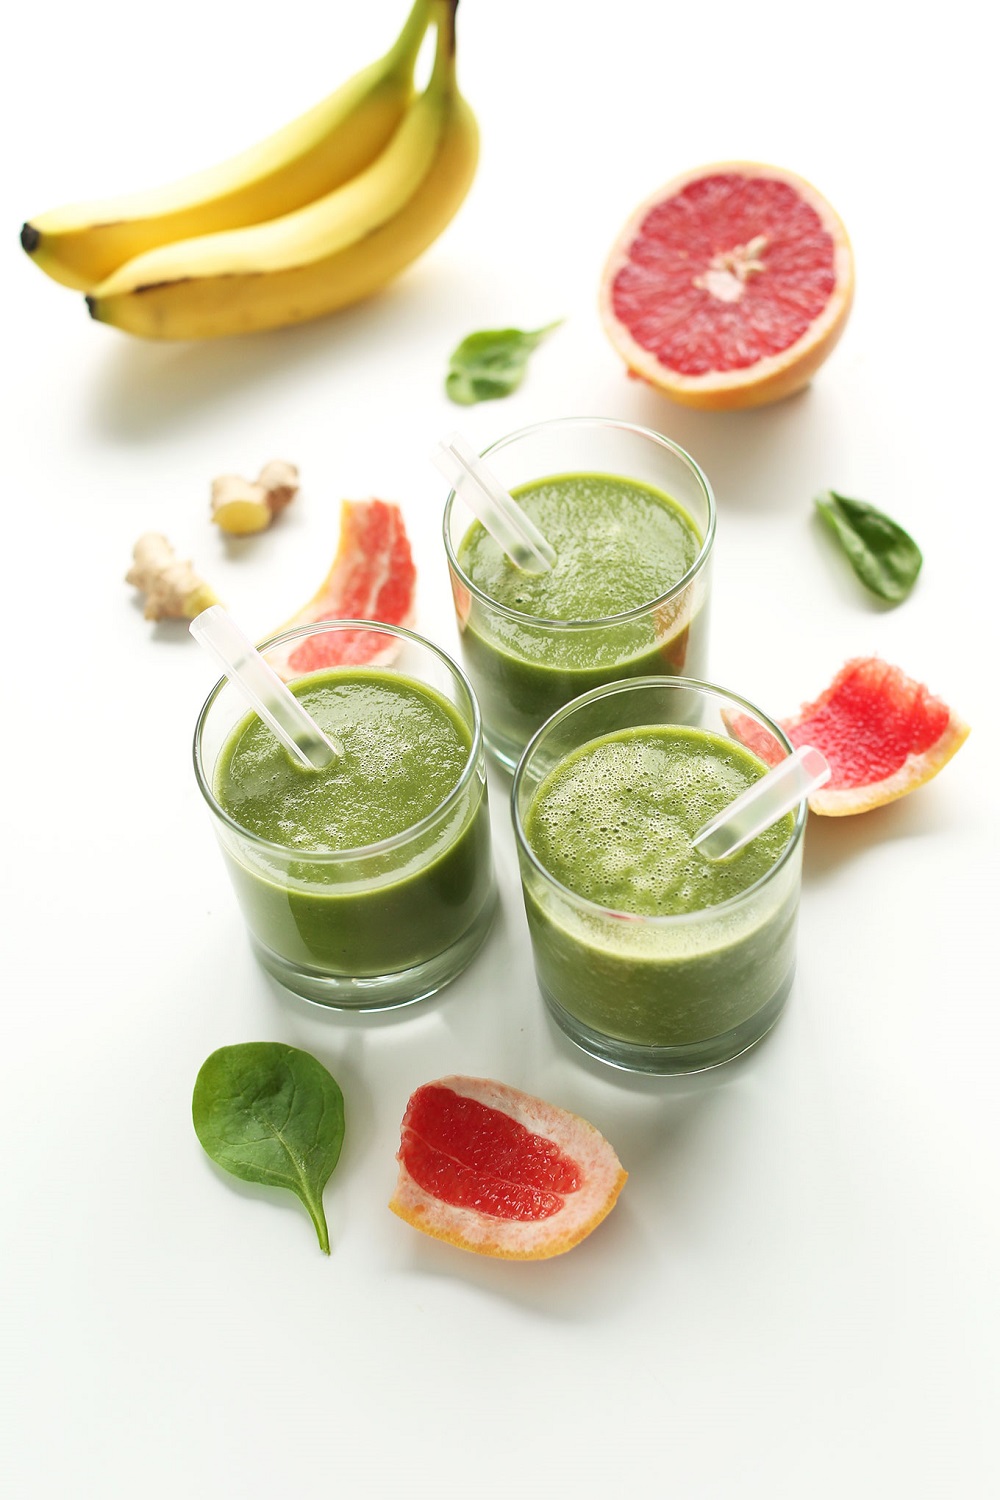 10 Incredibly Healthy and Delicious Green Smoothie Recipes You Will Love